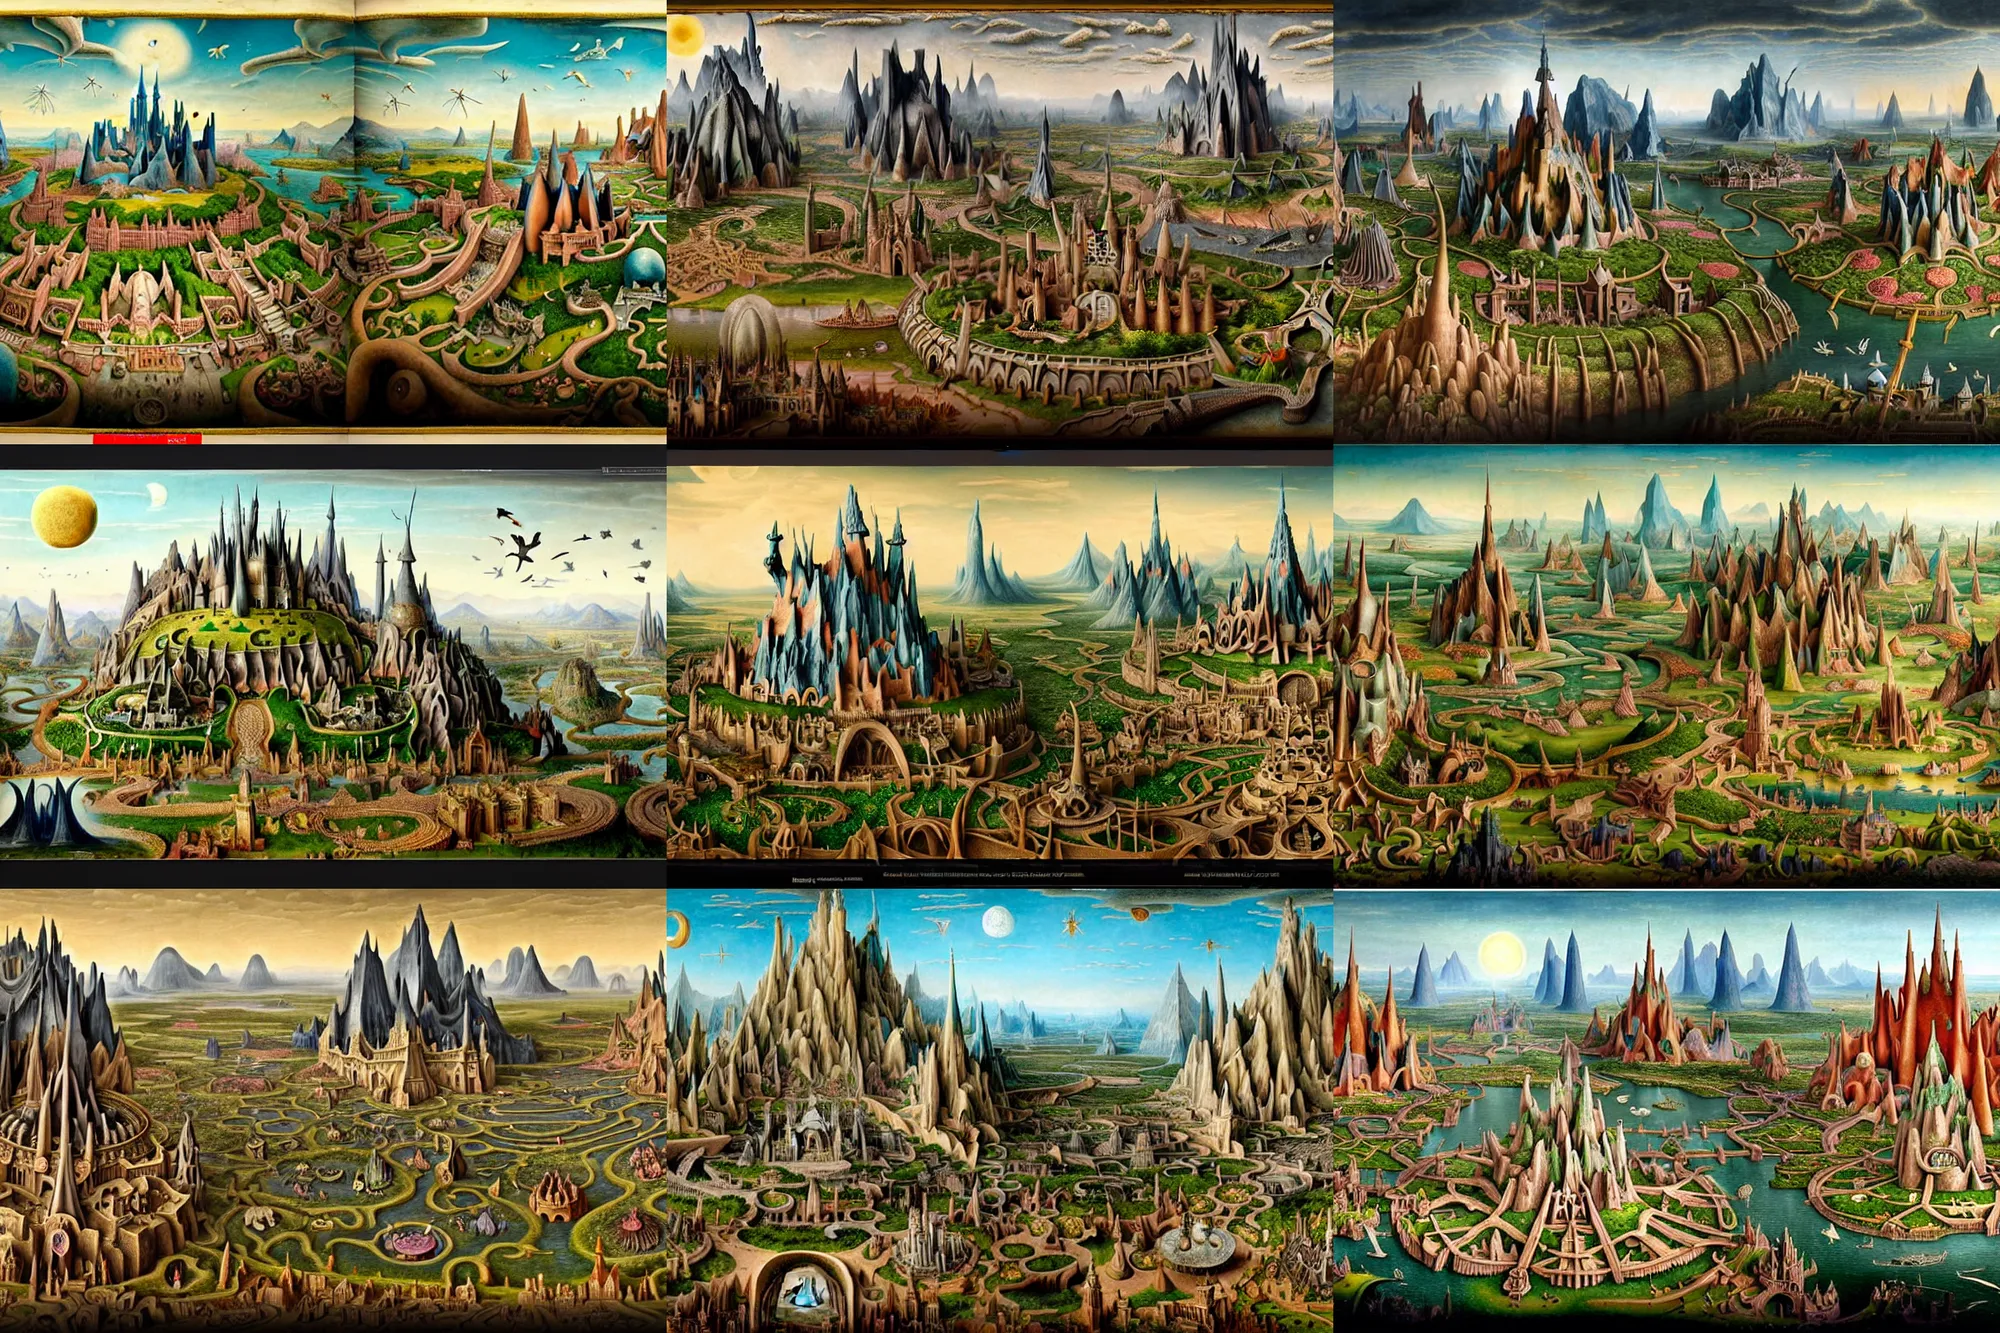 Prompt: a beautiful and insanely detailed matte painting of a magical mythical medieval sprawling civilization with surreal architecture designed by Heironymous Bosch, mega structures inspired by Heironymous Bosch's Garden of Earthly Delights, a beautiful and insanely detailed matte painting of a magical mythical medieval sprawling civilization with surreal architecture designed by Heironymous Bosch, mega structures inspired by Heironymous Bosch's Garden of Earthly Delights, a beautiful and insanely detailed matte painting of a magical mythical medieval sprawling civilization with surreal architecture designed by Heironymous Bosch, mega structures inspired by Heironymous Bosch's Garden of Earthly Delights, creatures of the air and sea inspired by Heironymous Bosch's Garden of Earthly Delights, ships in the harbor inspired by Heironymous Bosch's Garden of Earthly Delights, vast surreal landscape and horizon by Jim Burns and Tyler Edlin, vast surreal landscape and horizon by Jim Burns and Tyler Edlin, rich pastel color palette, masterpiece!!, grand!, imaginative!!!, whimsical!!, epic scale, intricate details, sense of awe, elite, fantasy realism, complex layered composition!!